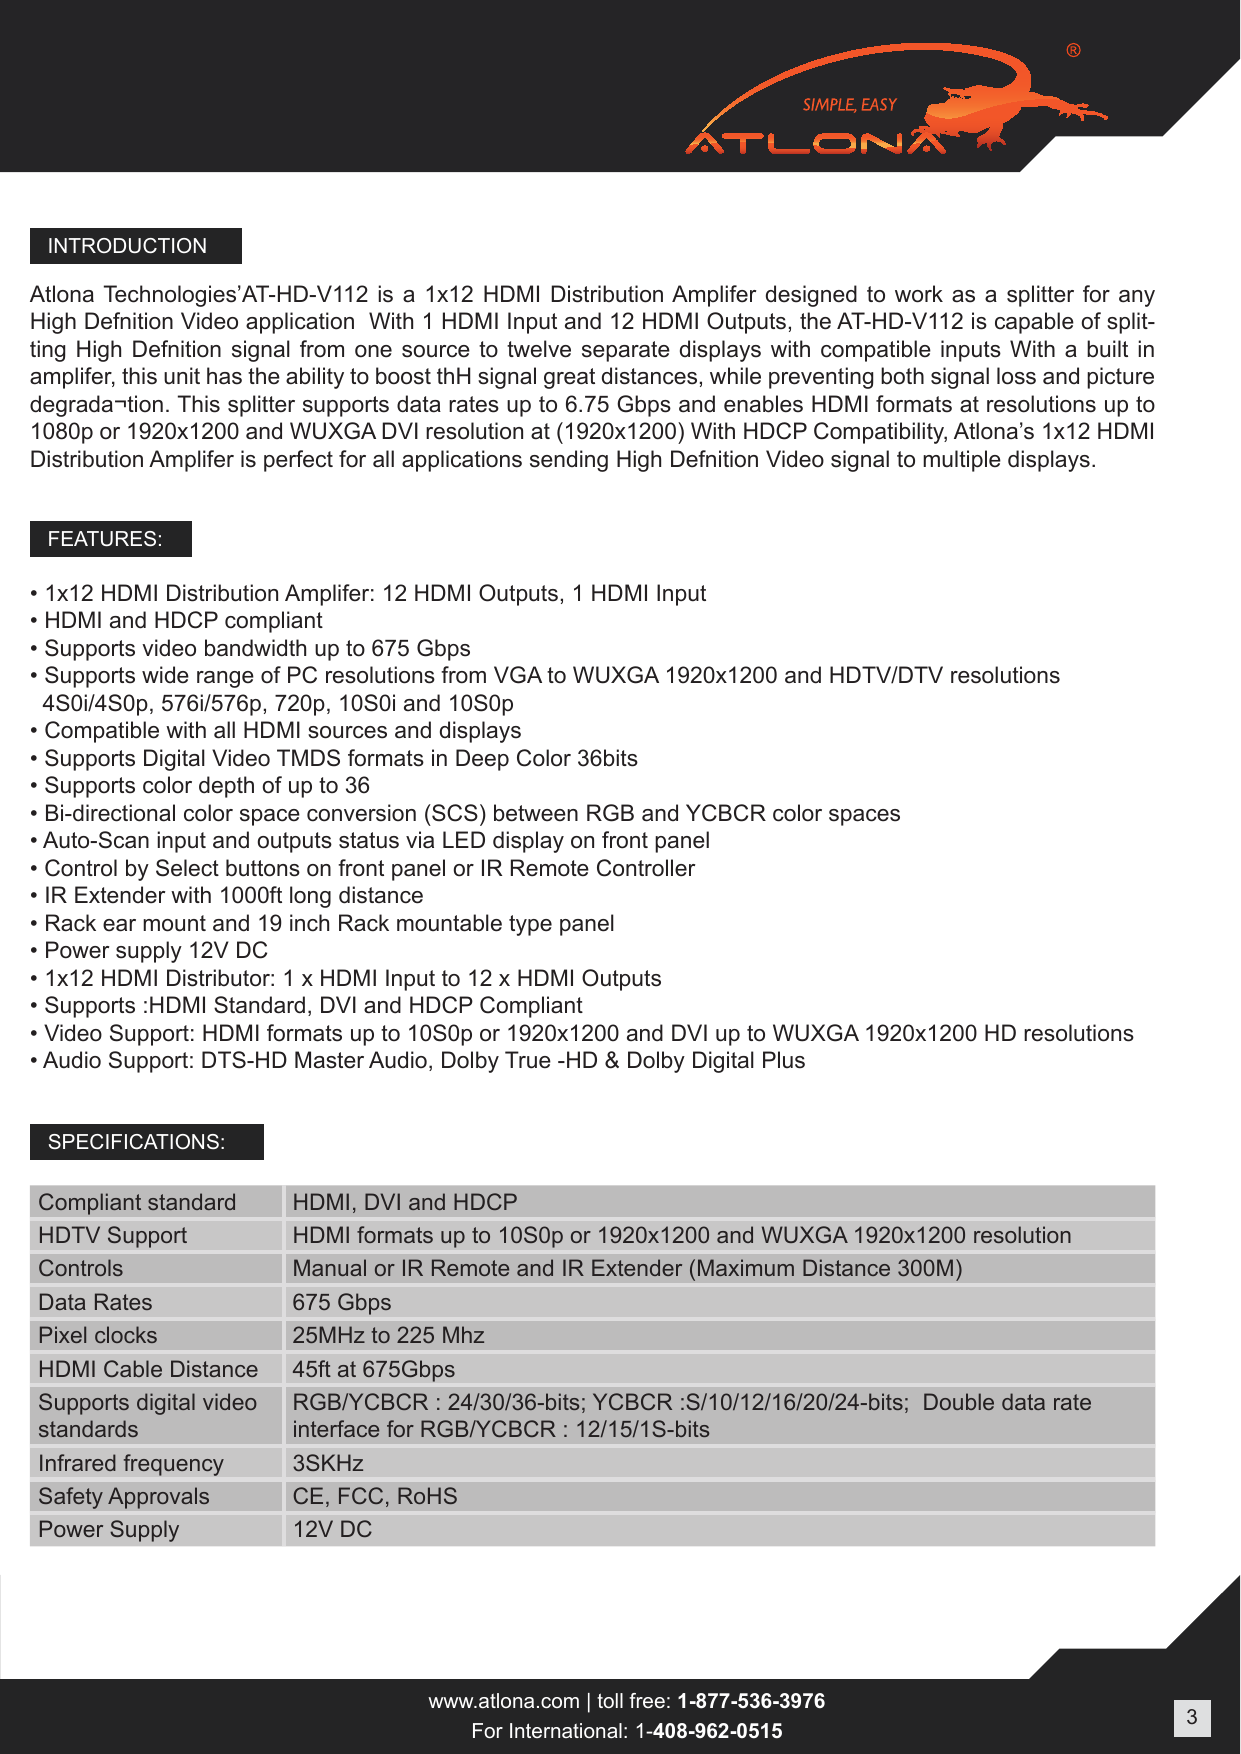 Page 3 of 9 - Atlona AT-HD-V112 User Manual  To The 2c5e098c-6c23-48f8-9cb7-b07608570673